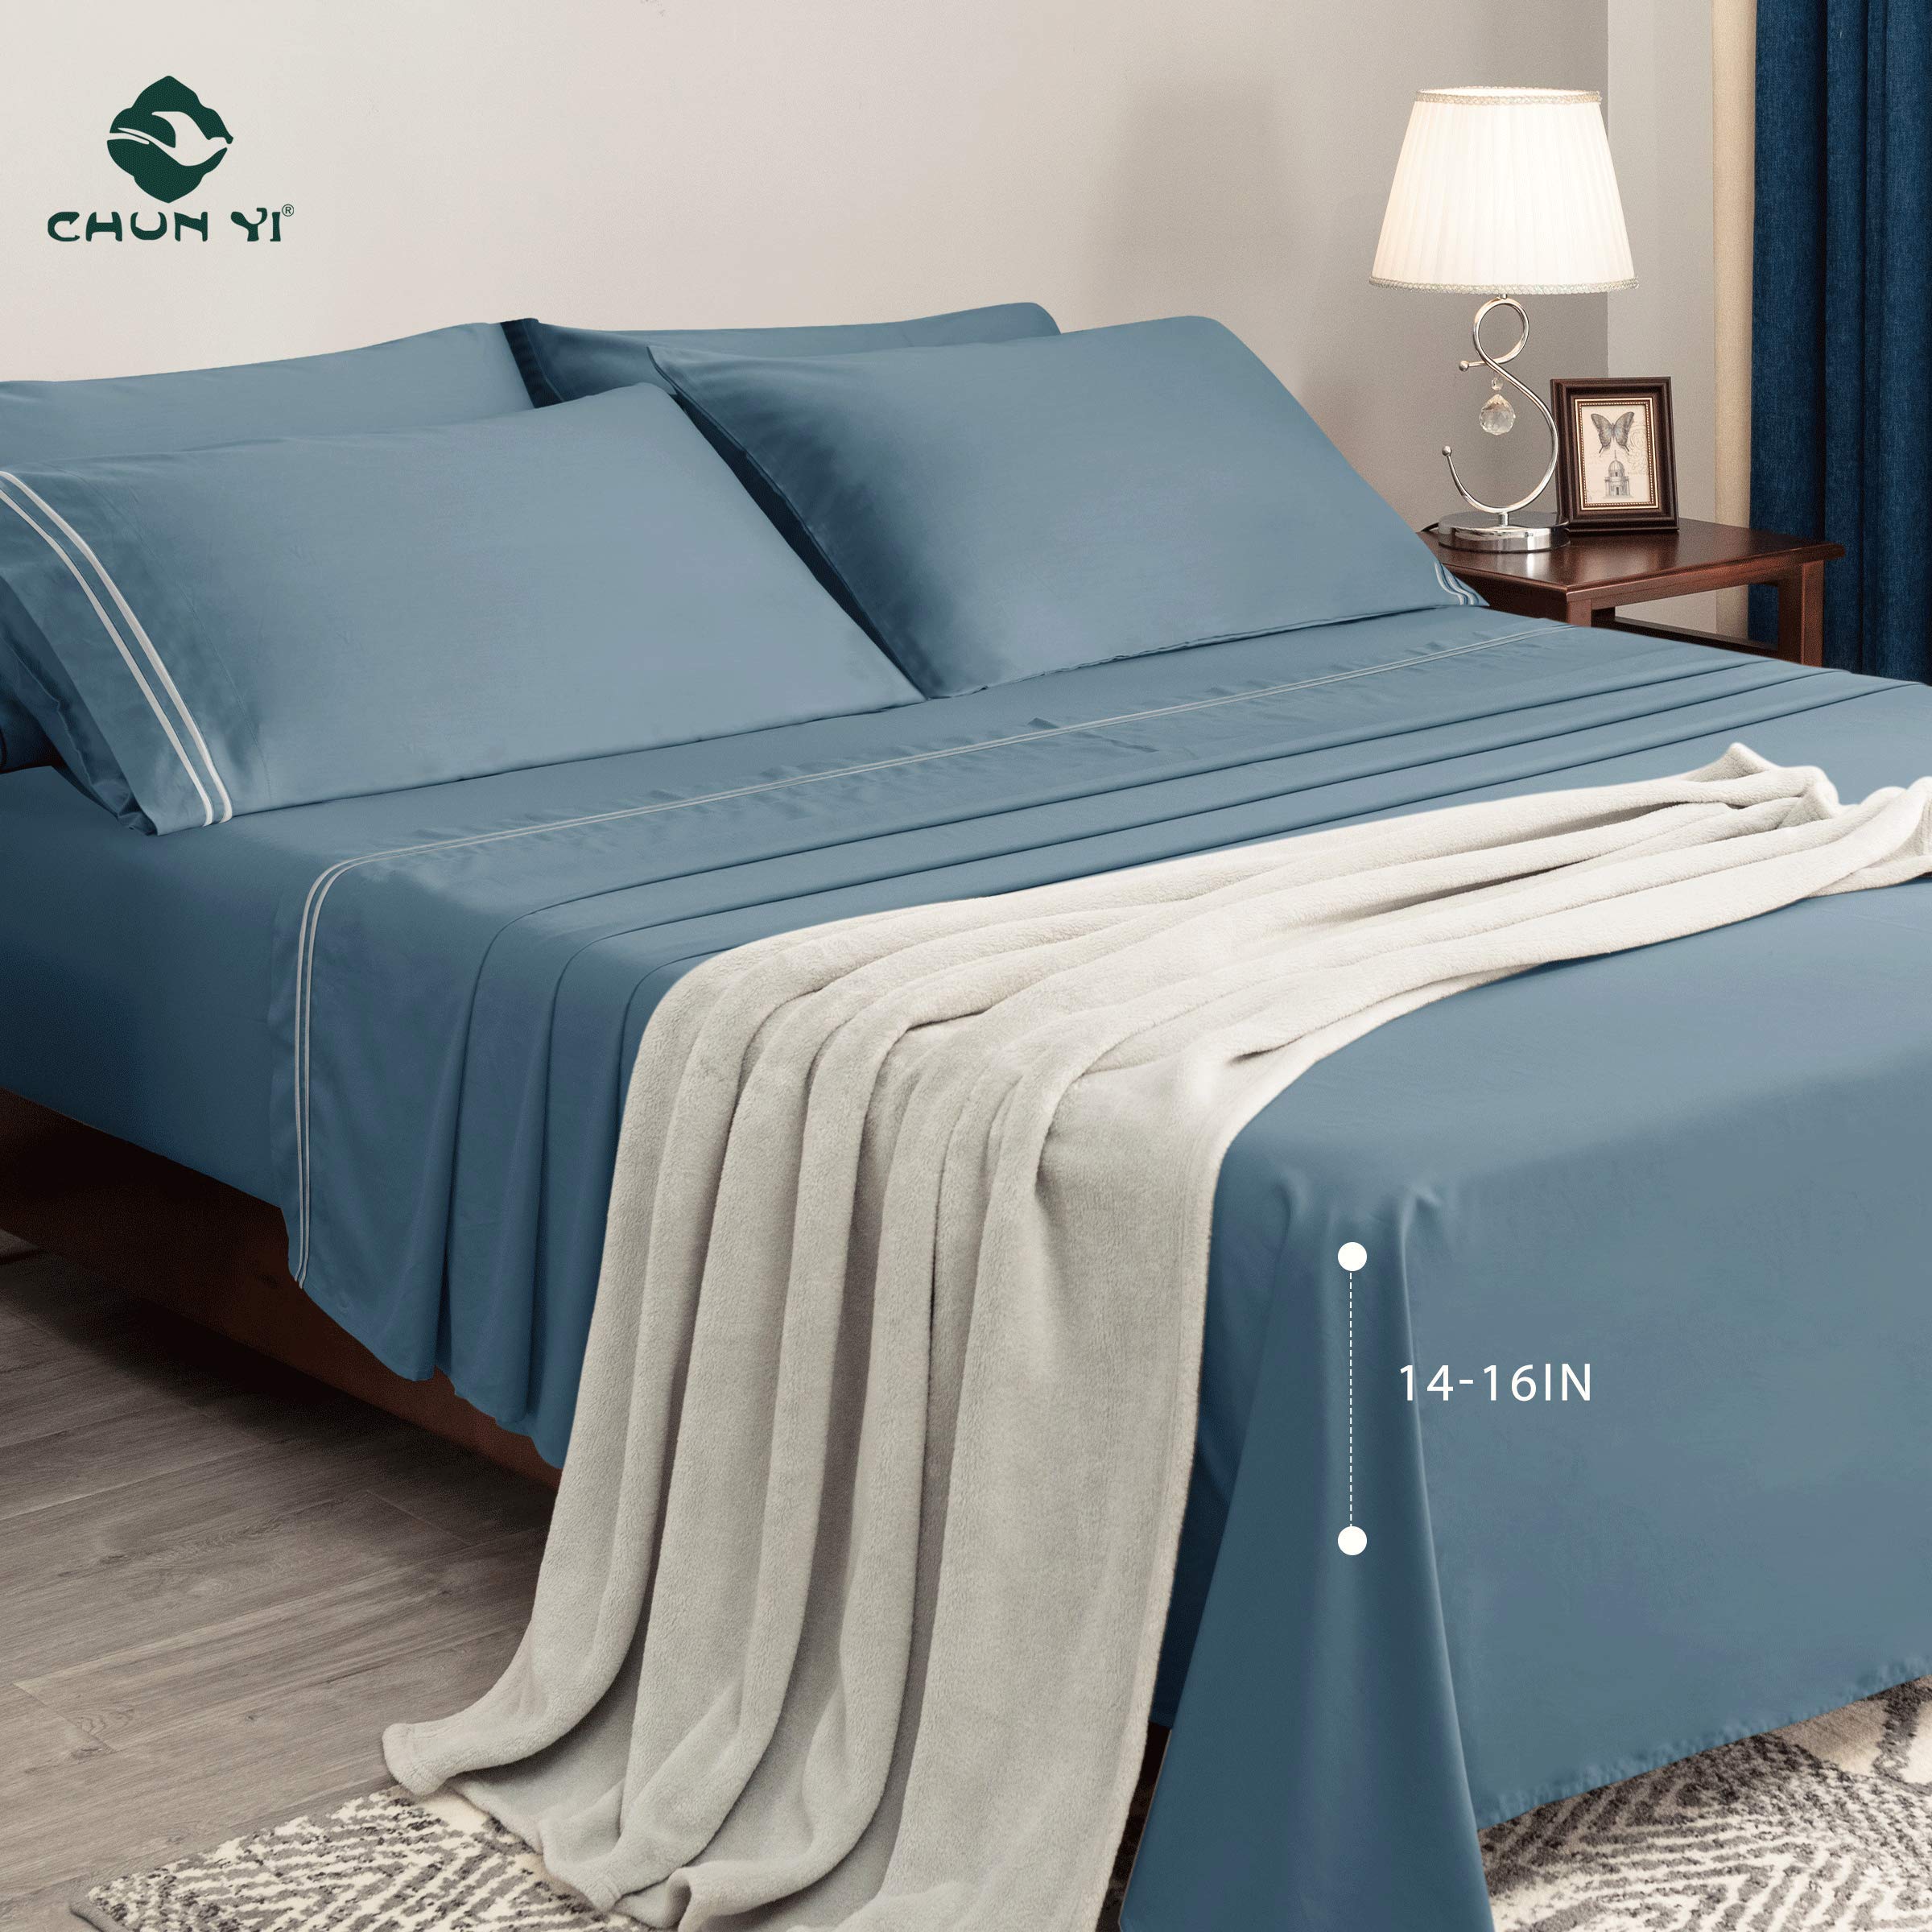 Luxury Cotton Bed Sheet Set - 4-Piece Full Bedding Sets with Tencel Fitted, Flat Sheet & Pillowcases - Deep Pocket for Easy Mattress Coverage